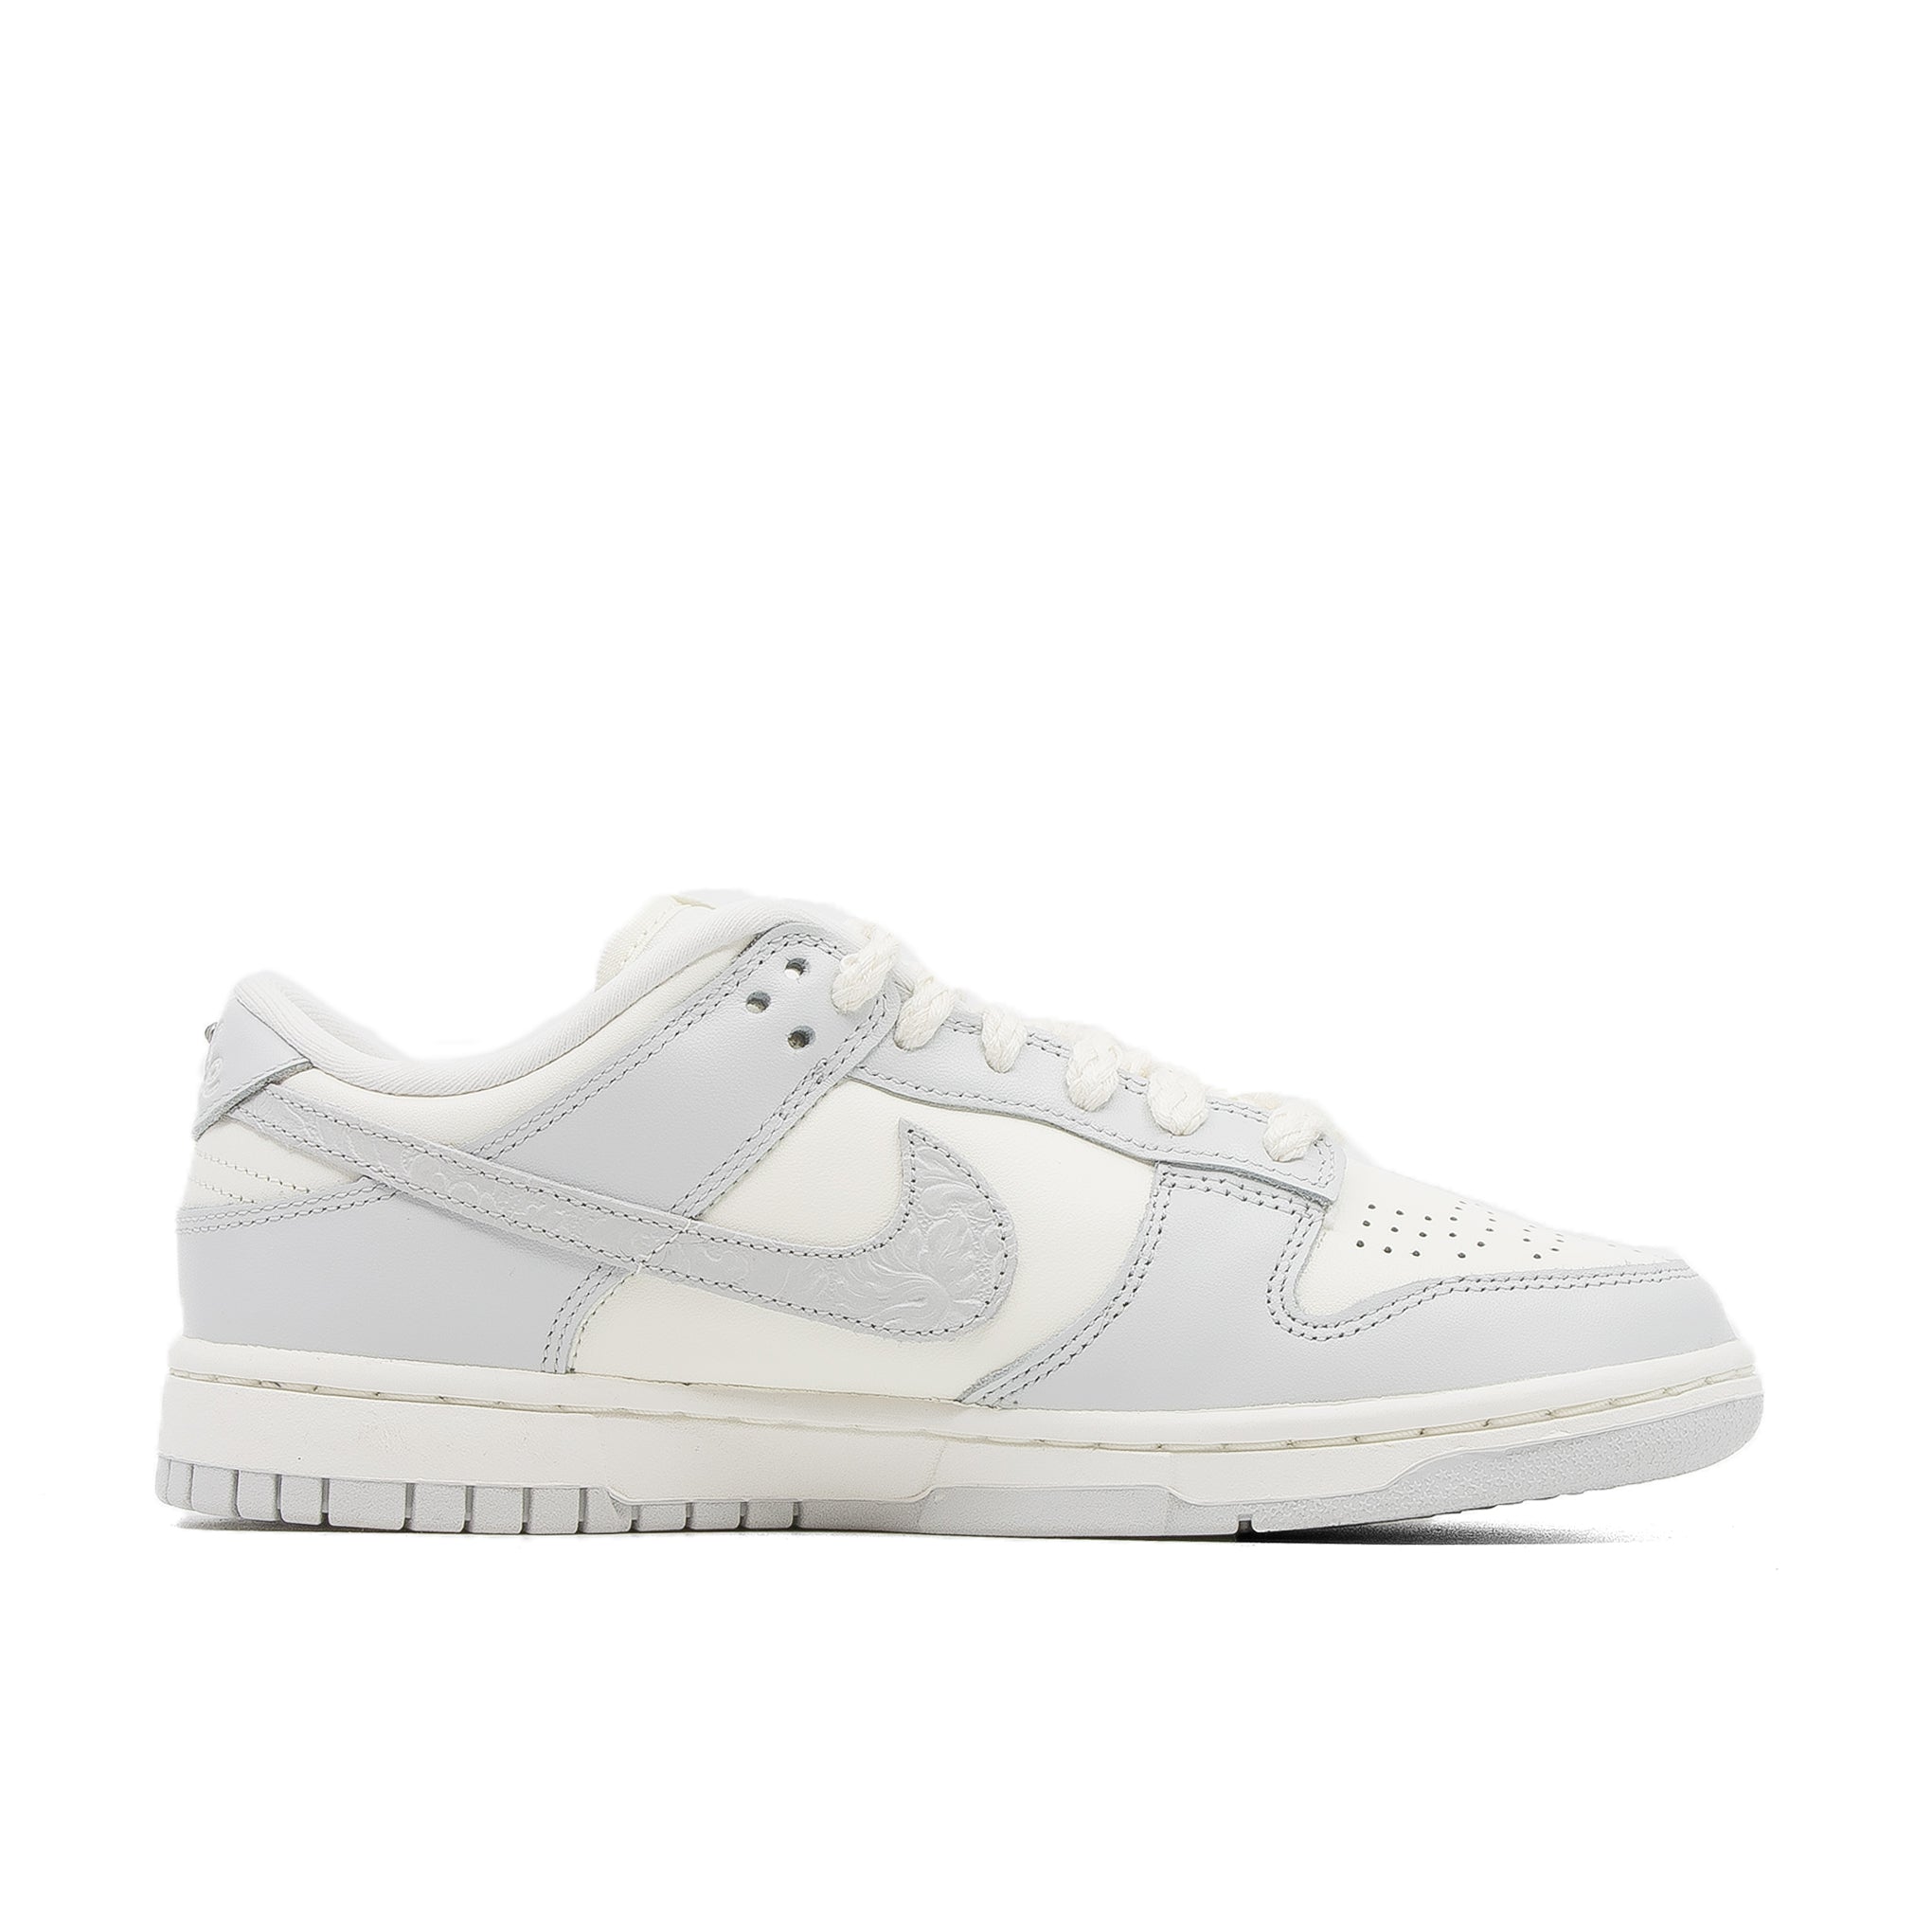 NIKE DUNK LOW WMNS 刺绣